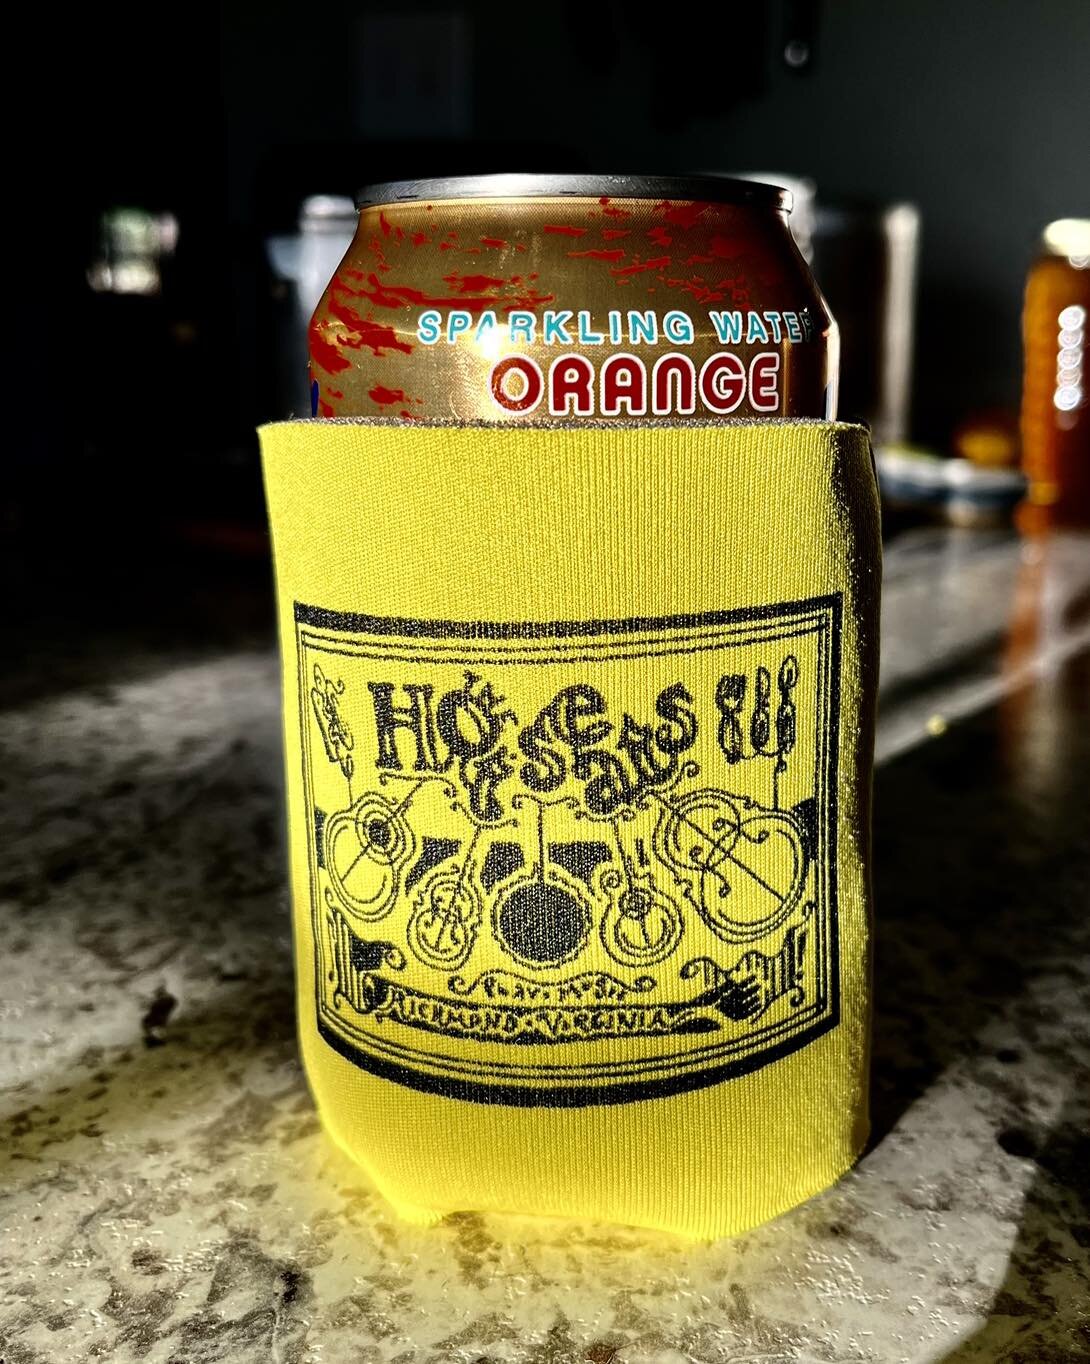 Ooooooweee! That&rsquo;s a cold and stylish drink! Get yours at your next Hot Seats show (January 20th at Union Market RVA!)

#koozies #insulation #icecold #LavaHot #theshotseats #unionmarketrva